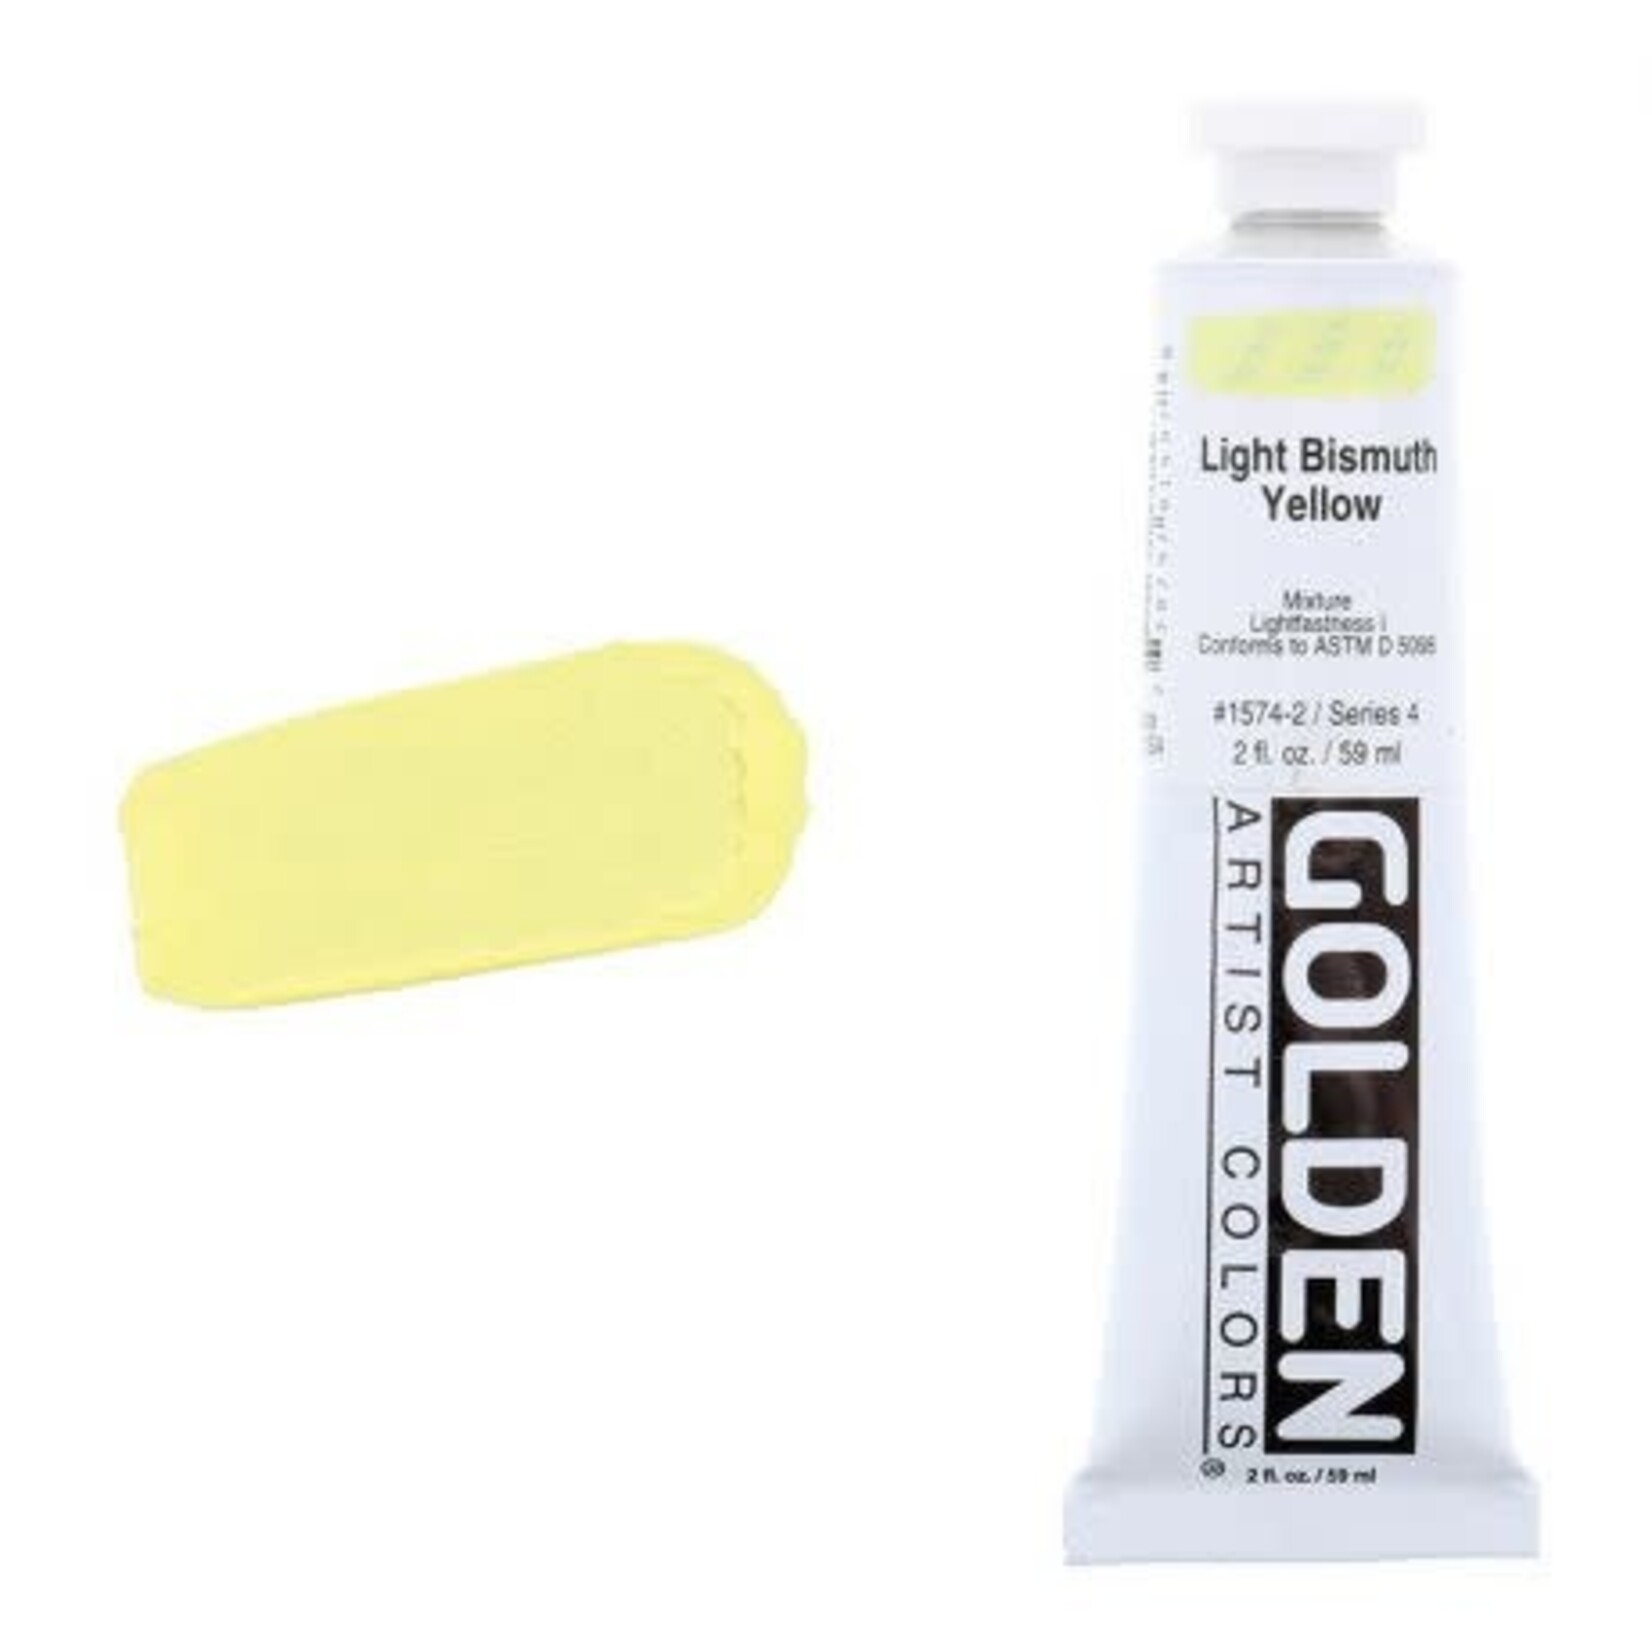 Golden HB Light Bismuth Yellow 2 oz tube Series 4